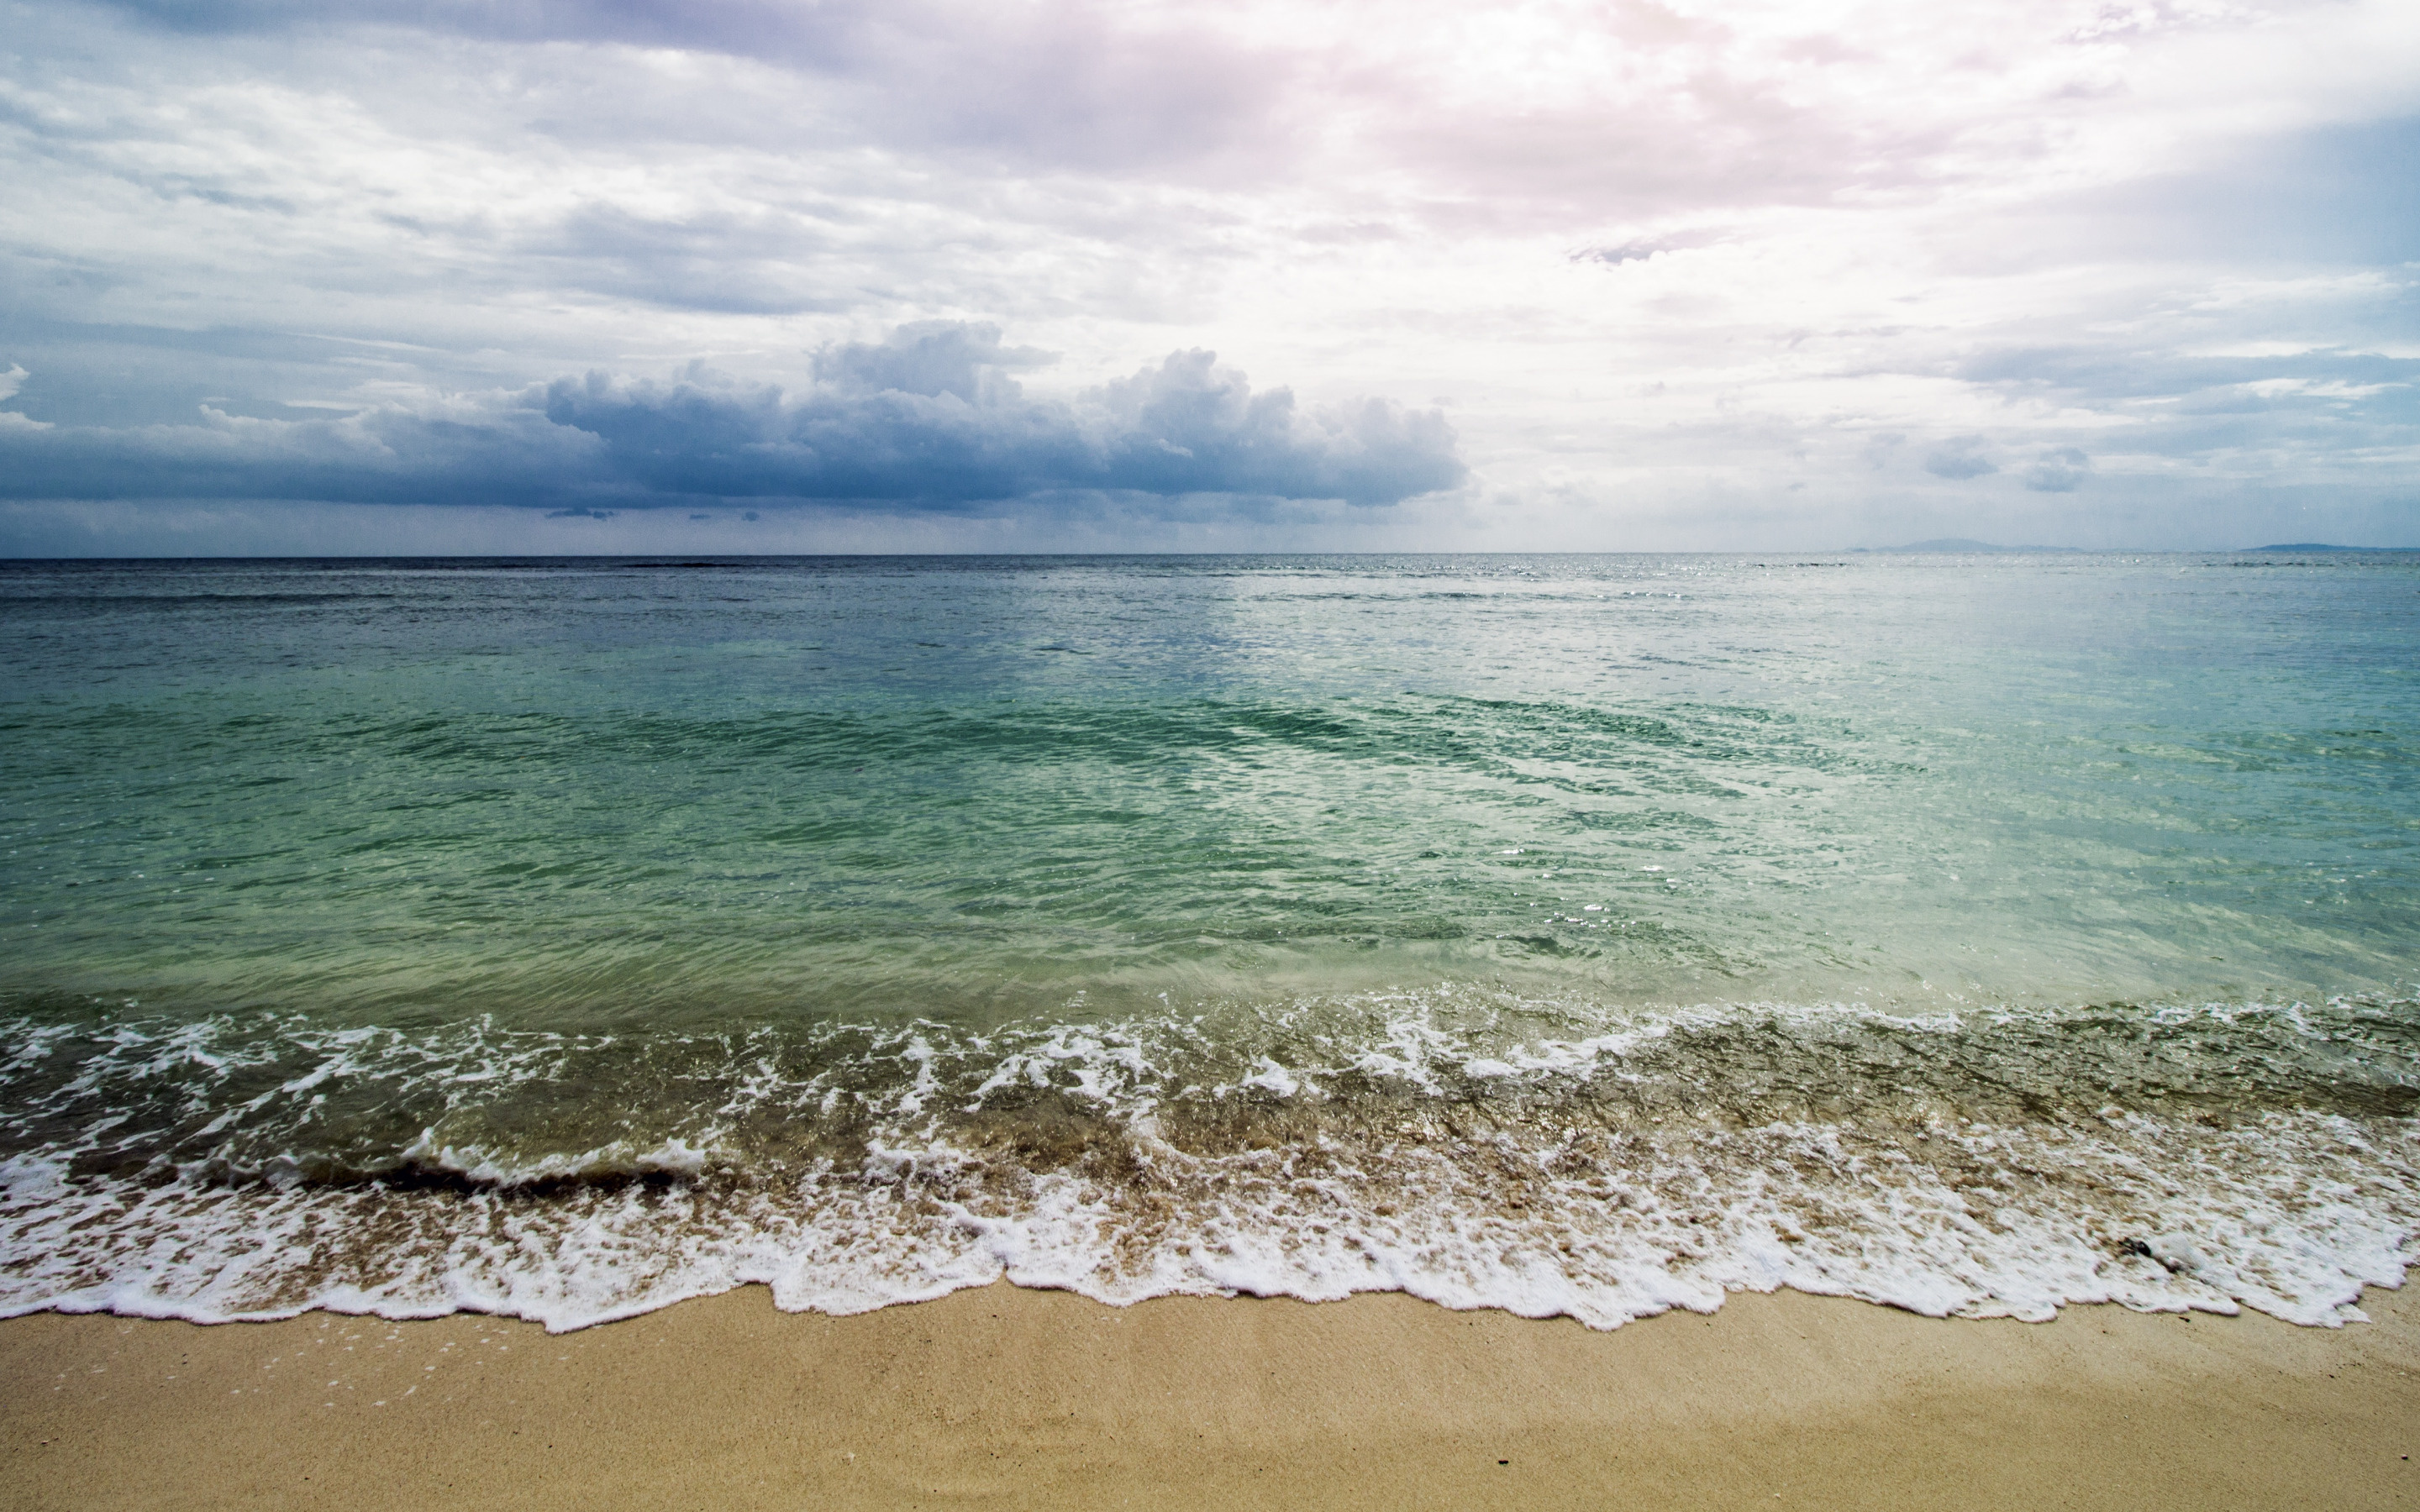 Seascape: Sandy coast of the sea, Sea breeze, Foamy but still waves, A place for vacation. 2880x1800 HD Background.